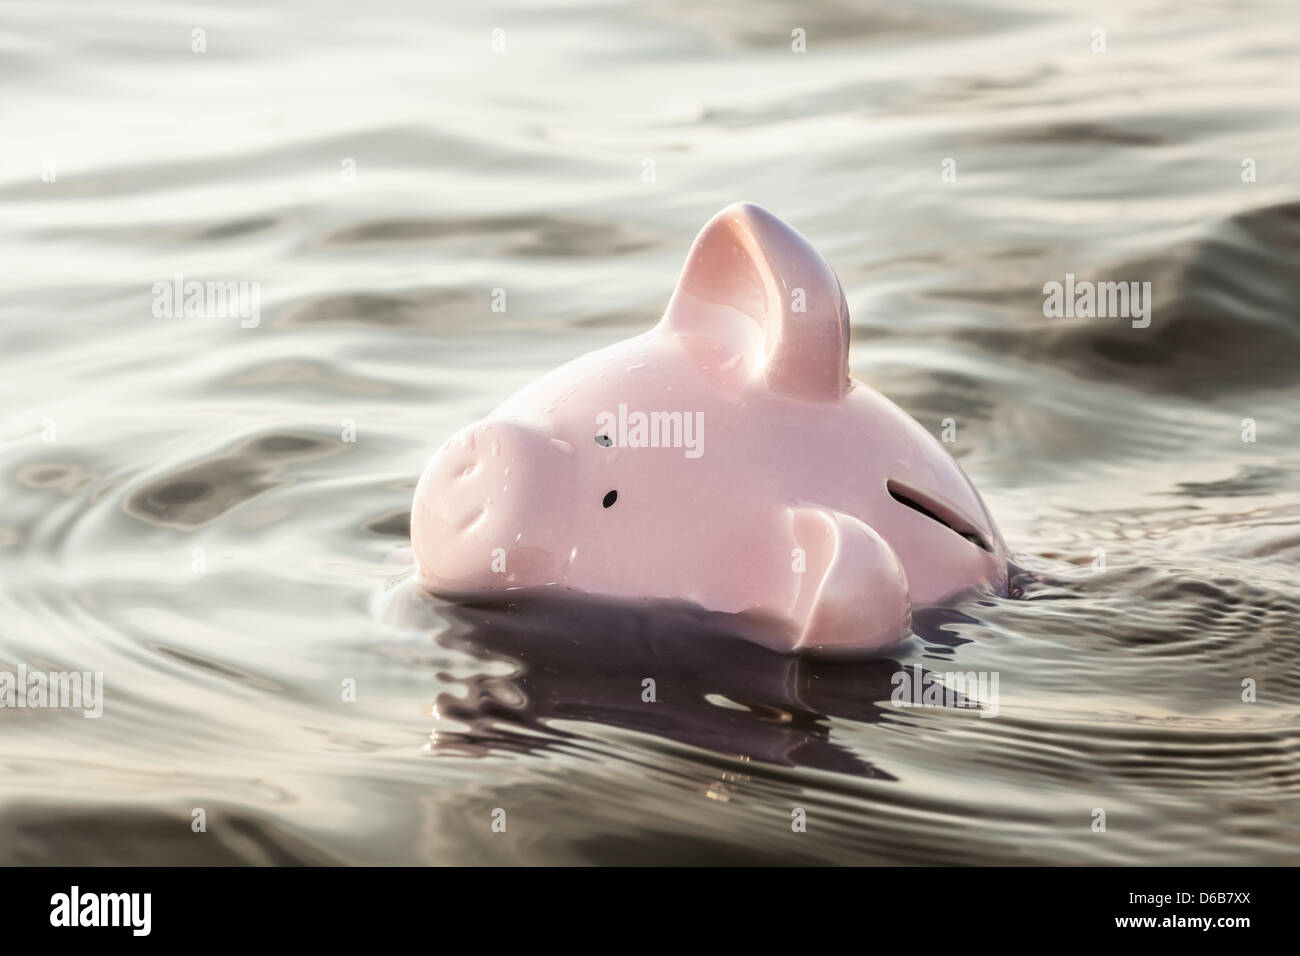 Piggy bank floating in water Stock Photo